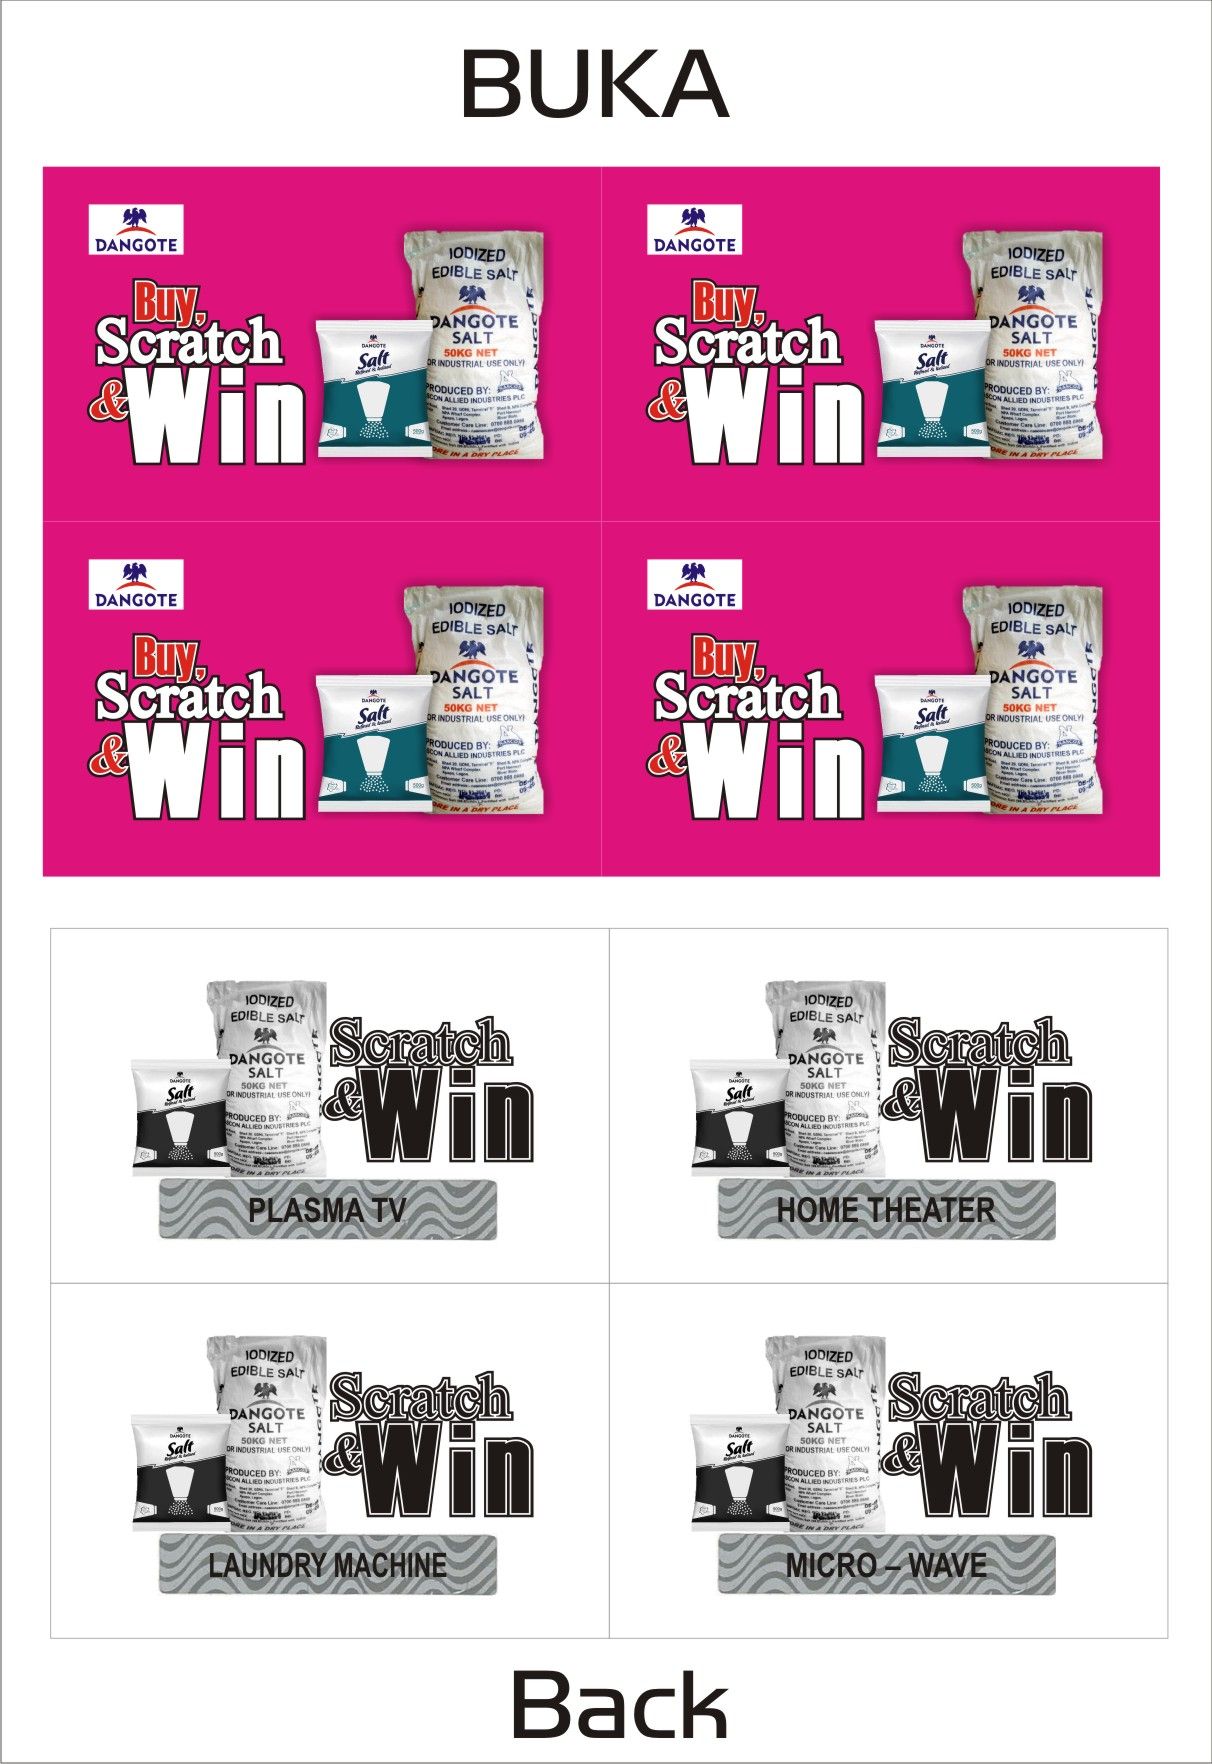 PRINT SCRATCH AND WIN PROMO CARDS TO BOOST YOUR SALES. CALL CHINEDU ON 08179651585 FOR MORE DETAILS